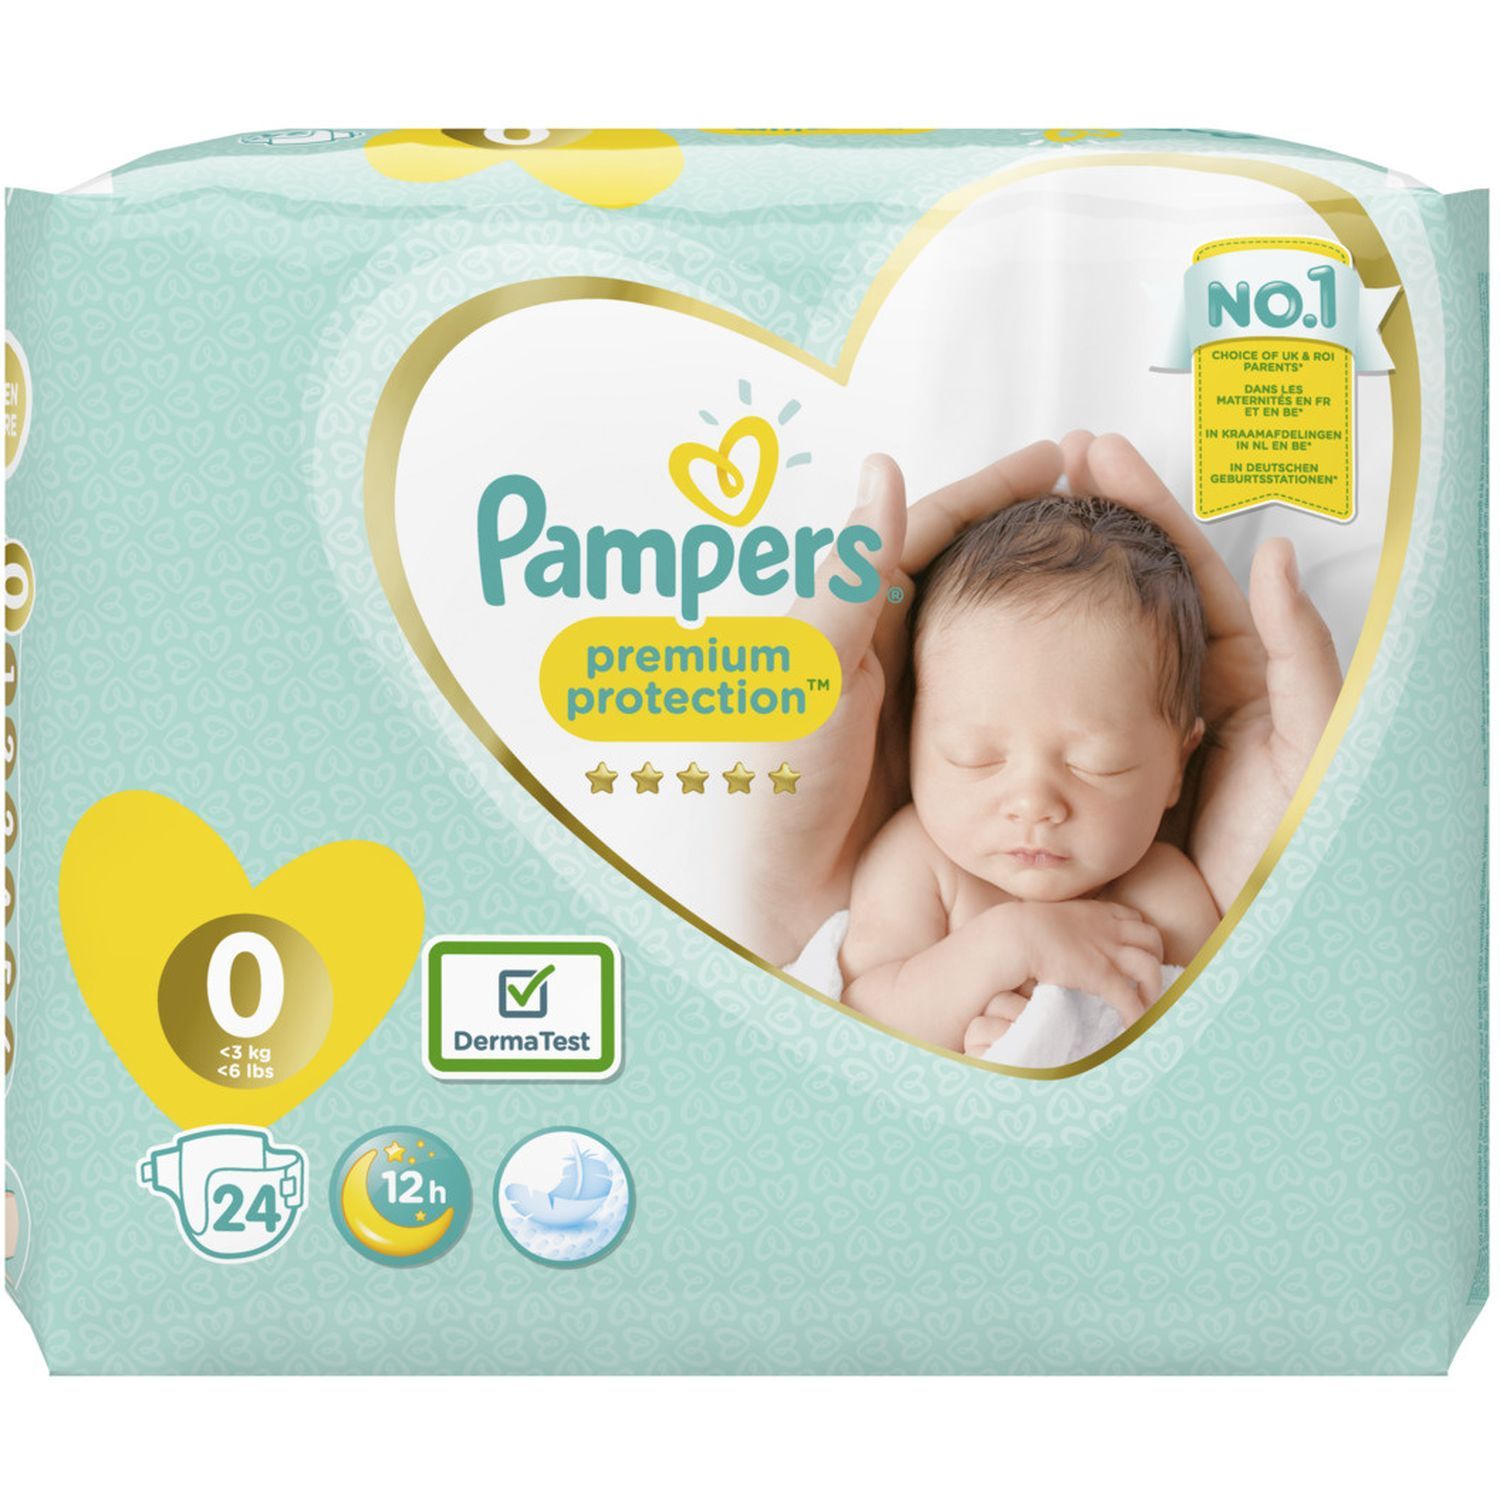 pampers.roz 3